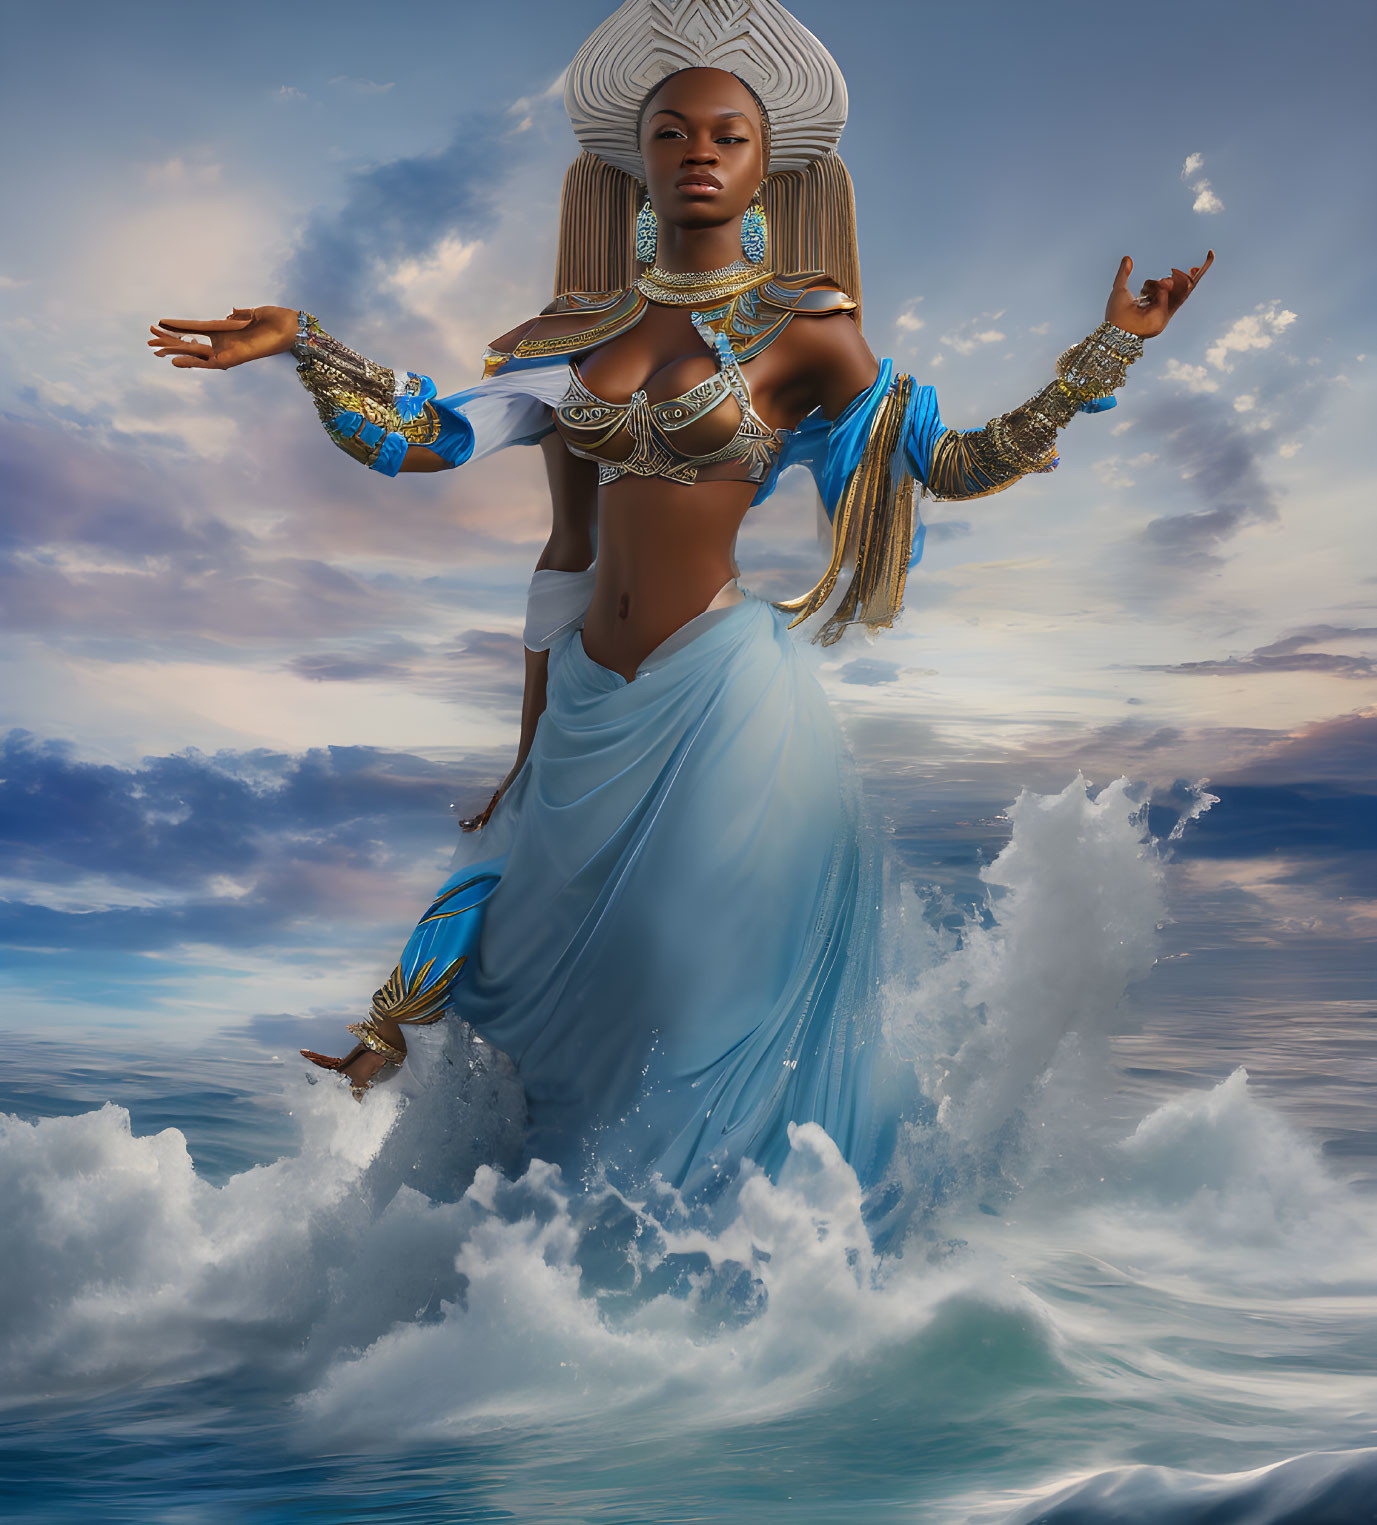 Woman with Elaborate Headdress and Jewelry Emerging from Waves in Dramatic Sky